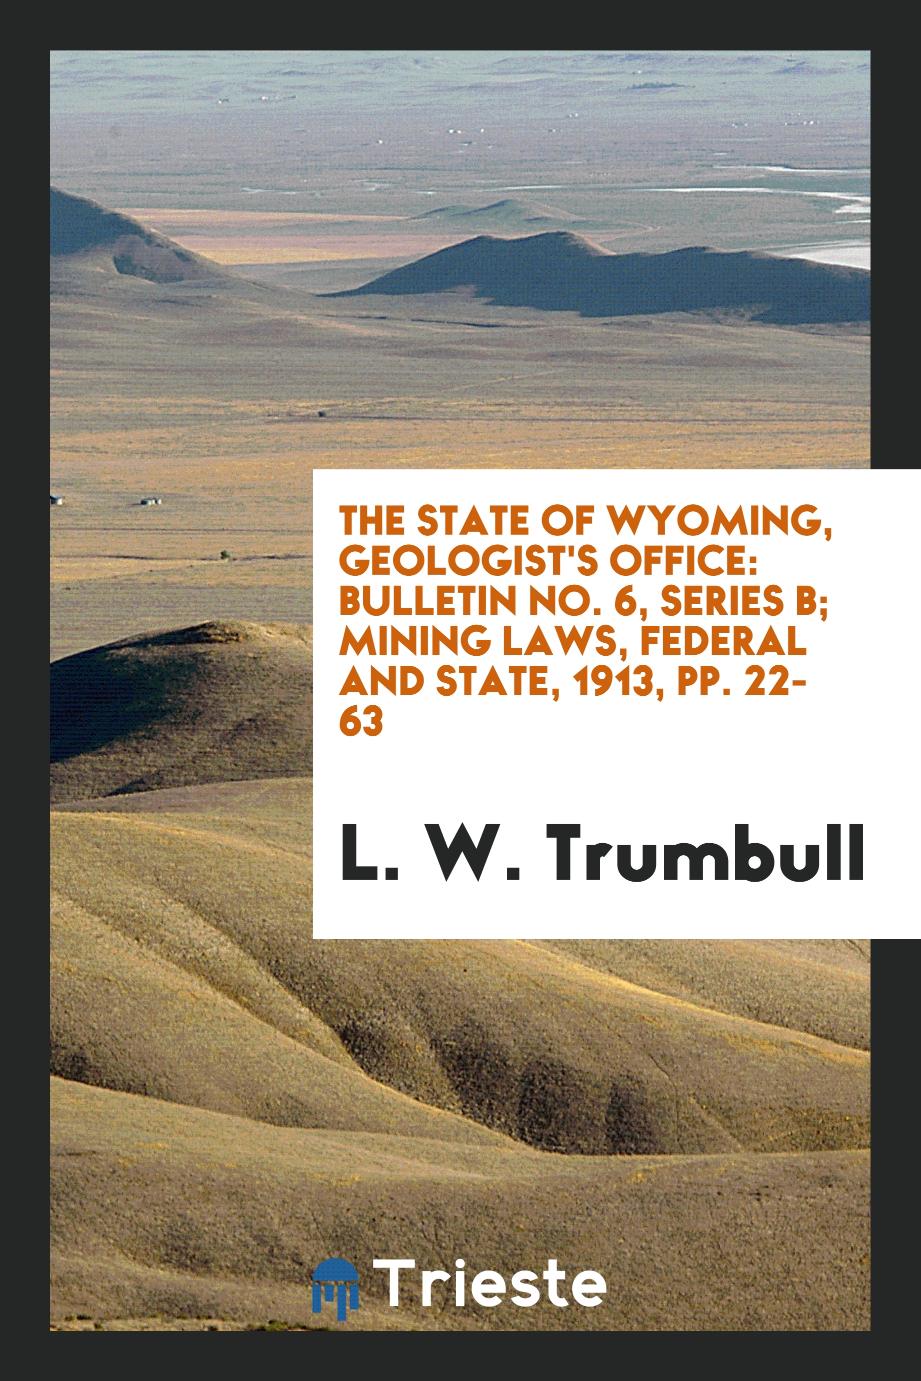 The state of Wyoming, geologist's office: Bulletin No. 6, Series B; Mining Laws, federal and state, 1913, pp. 22-63